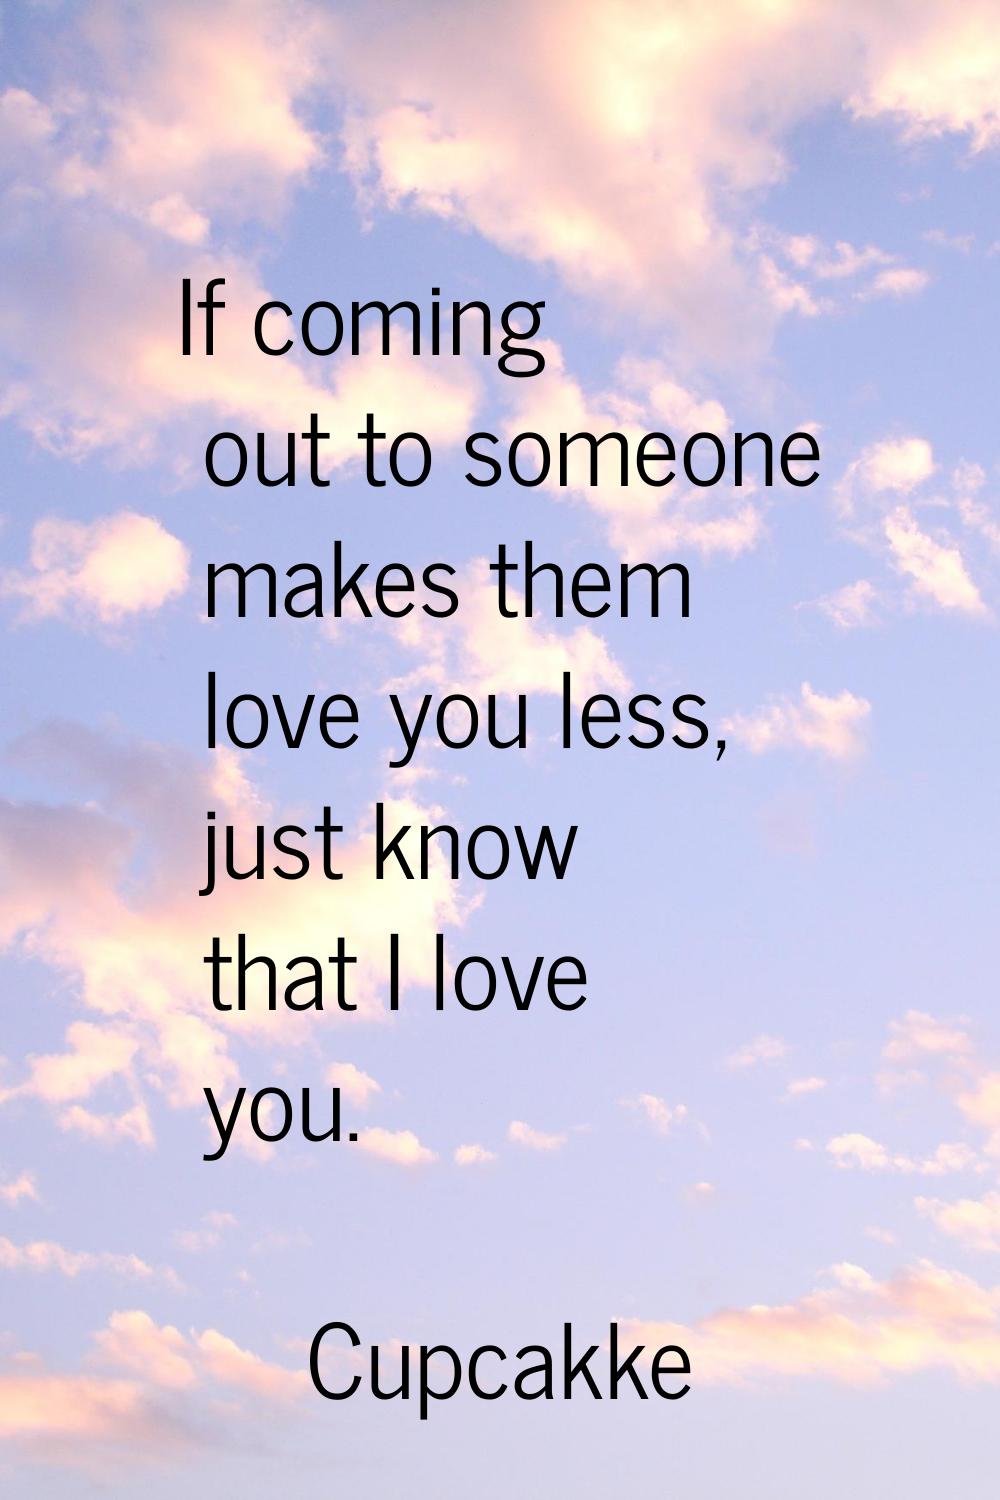 If coming out to someone makes them love you less, just know that I love you.